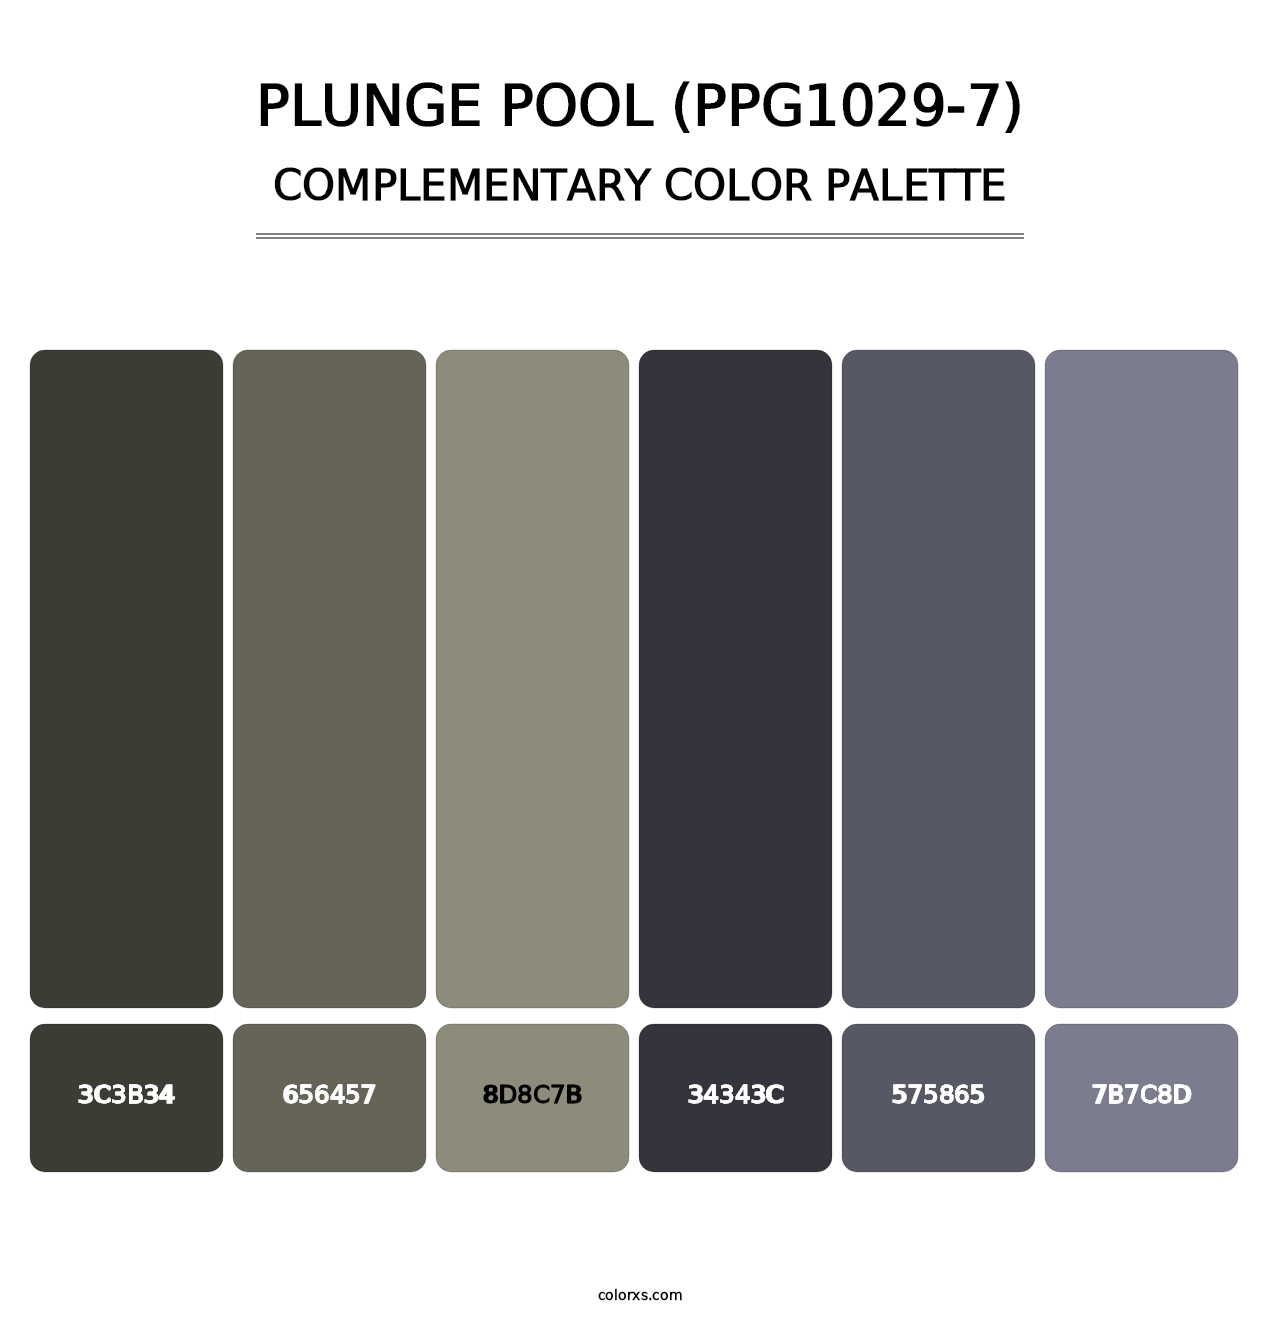 Plunge Pool (PPG1029-7) - Complementary Color Palette